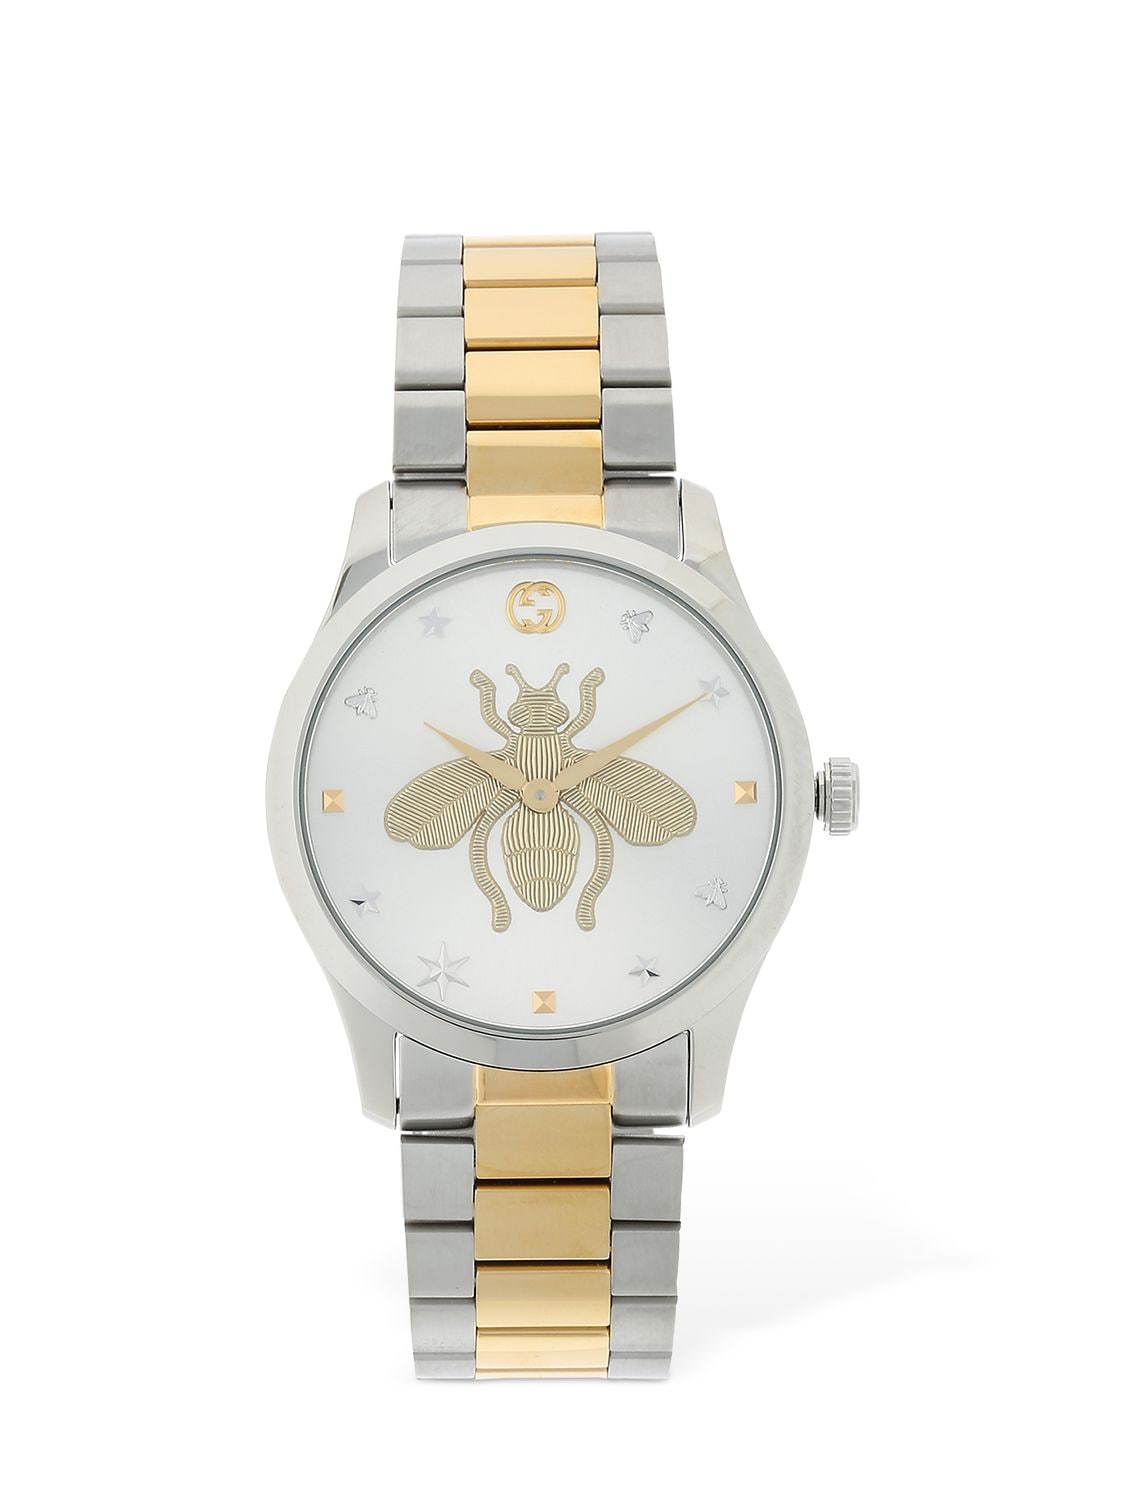 38mm G-timeless Two-tone Bee Motif Watch